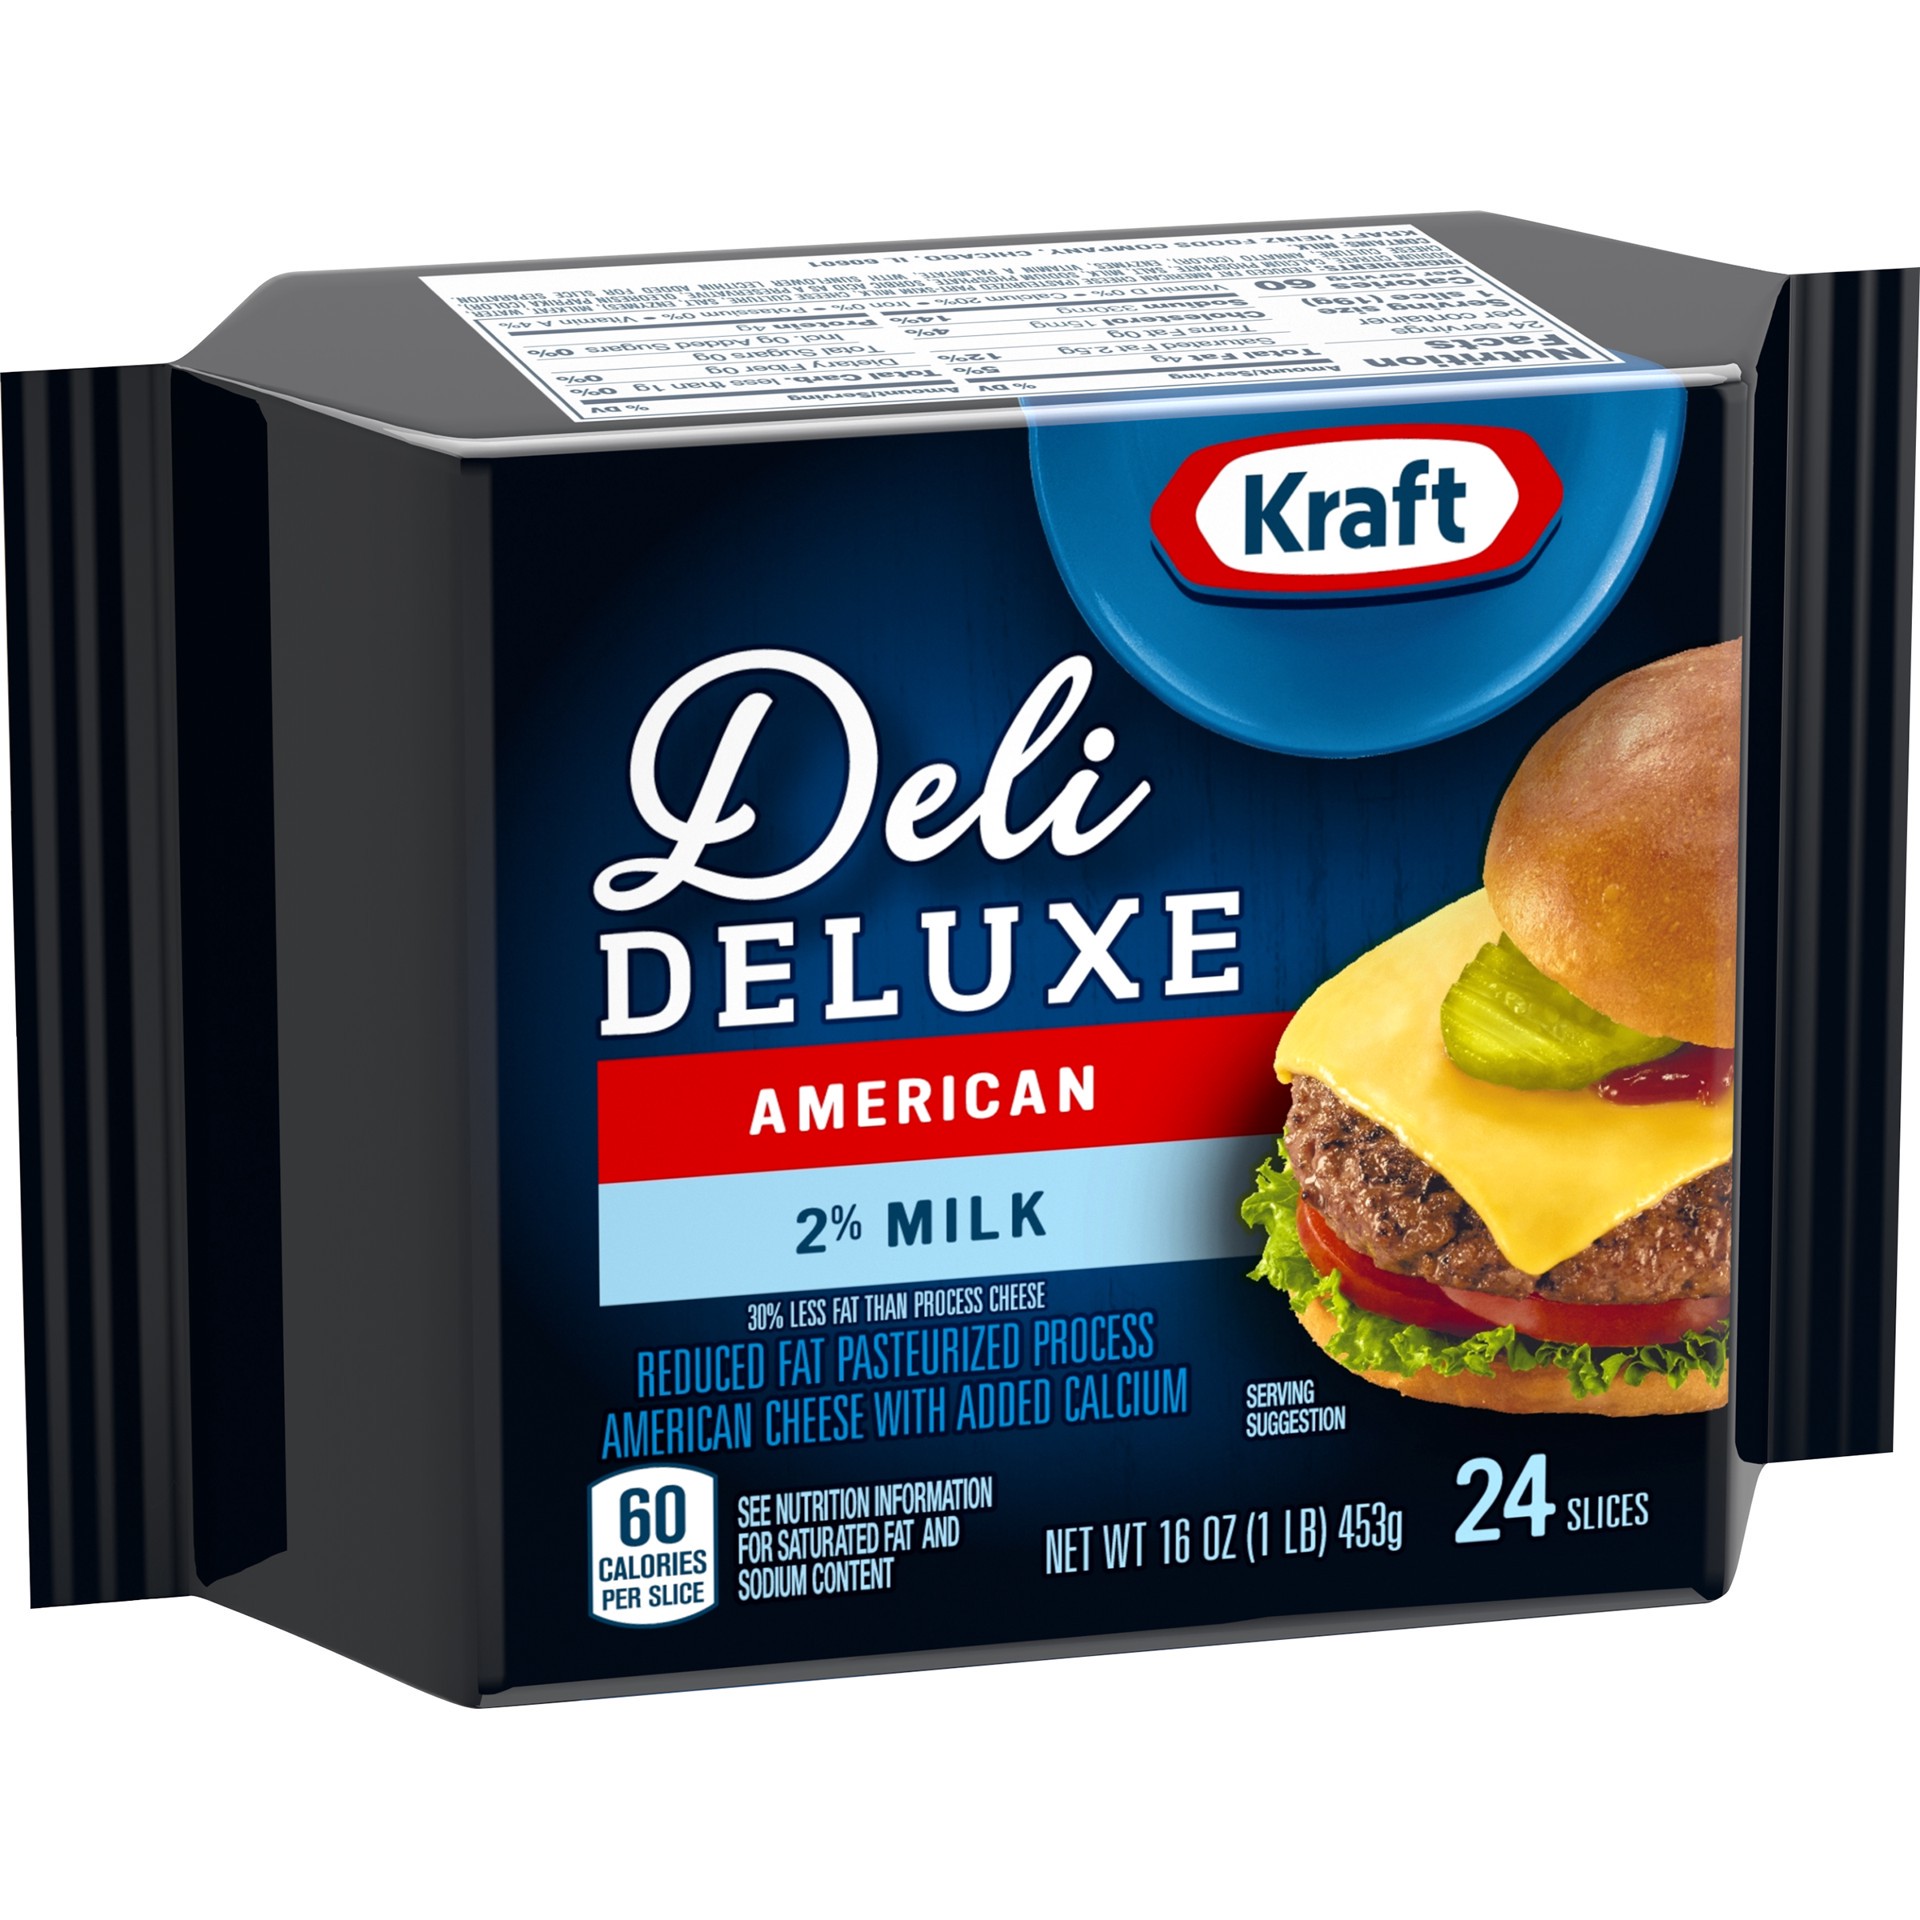 slide 4 of 6, Kraft Deli Deluxe American Cheese Slices with 2% Milk Pack, 16 oz